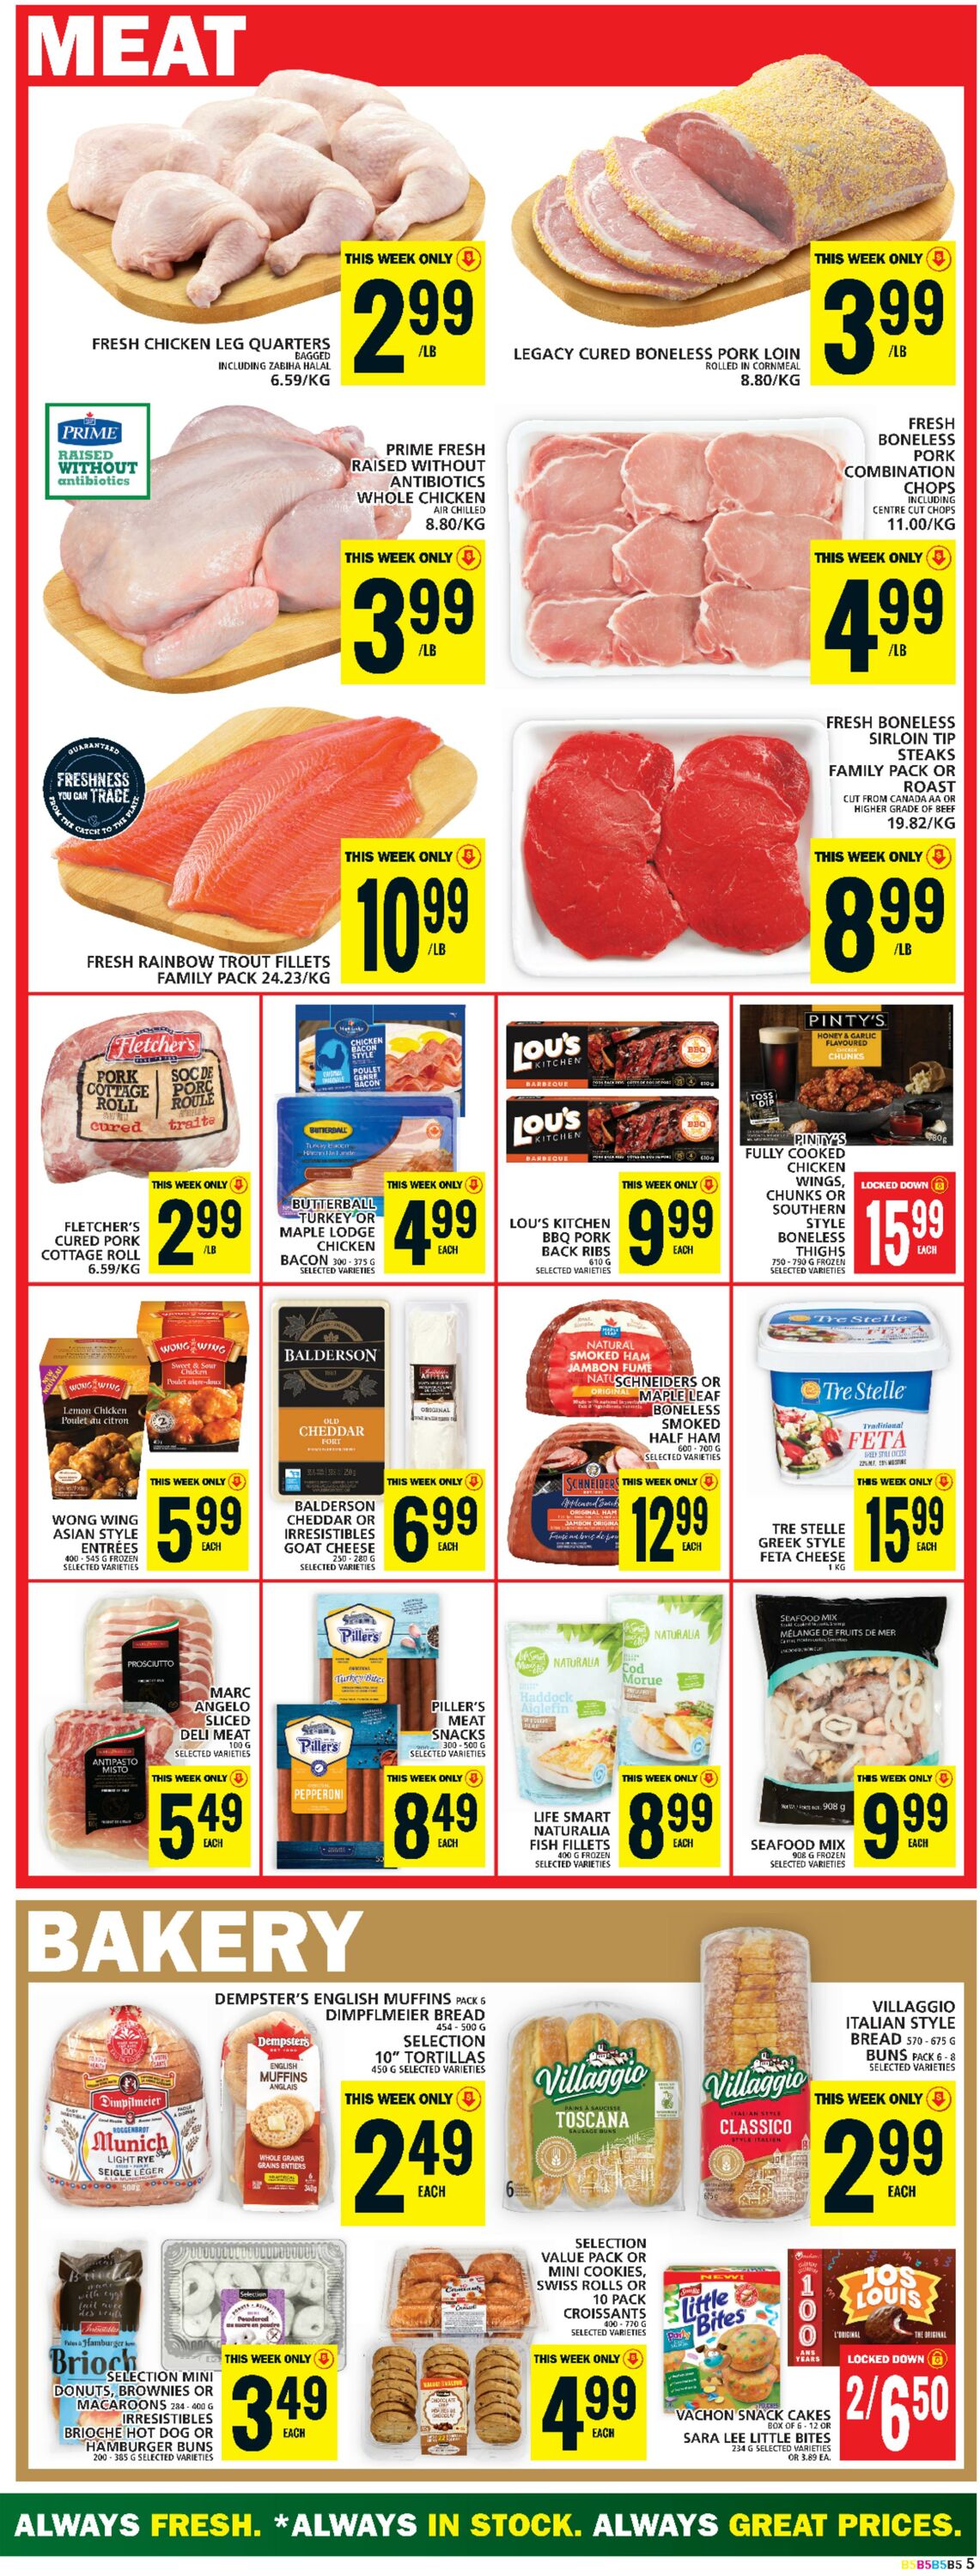 Food Basics Promotional Flyer - Valid from 25.05 to 31.05 - Page nb 6 ...